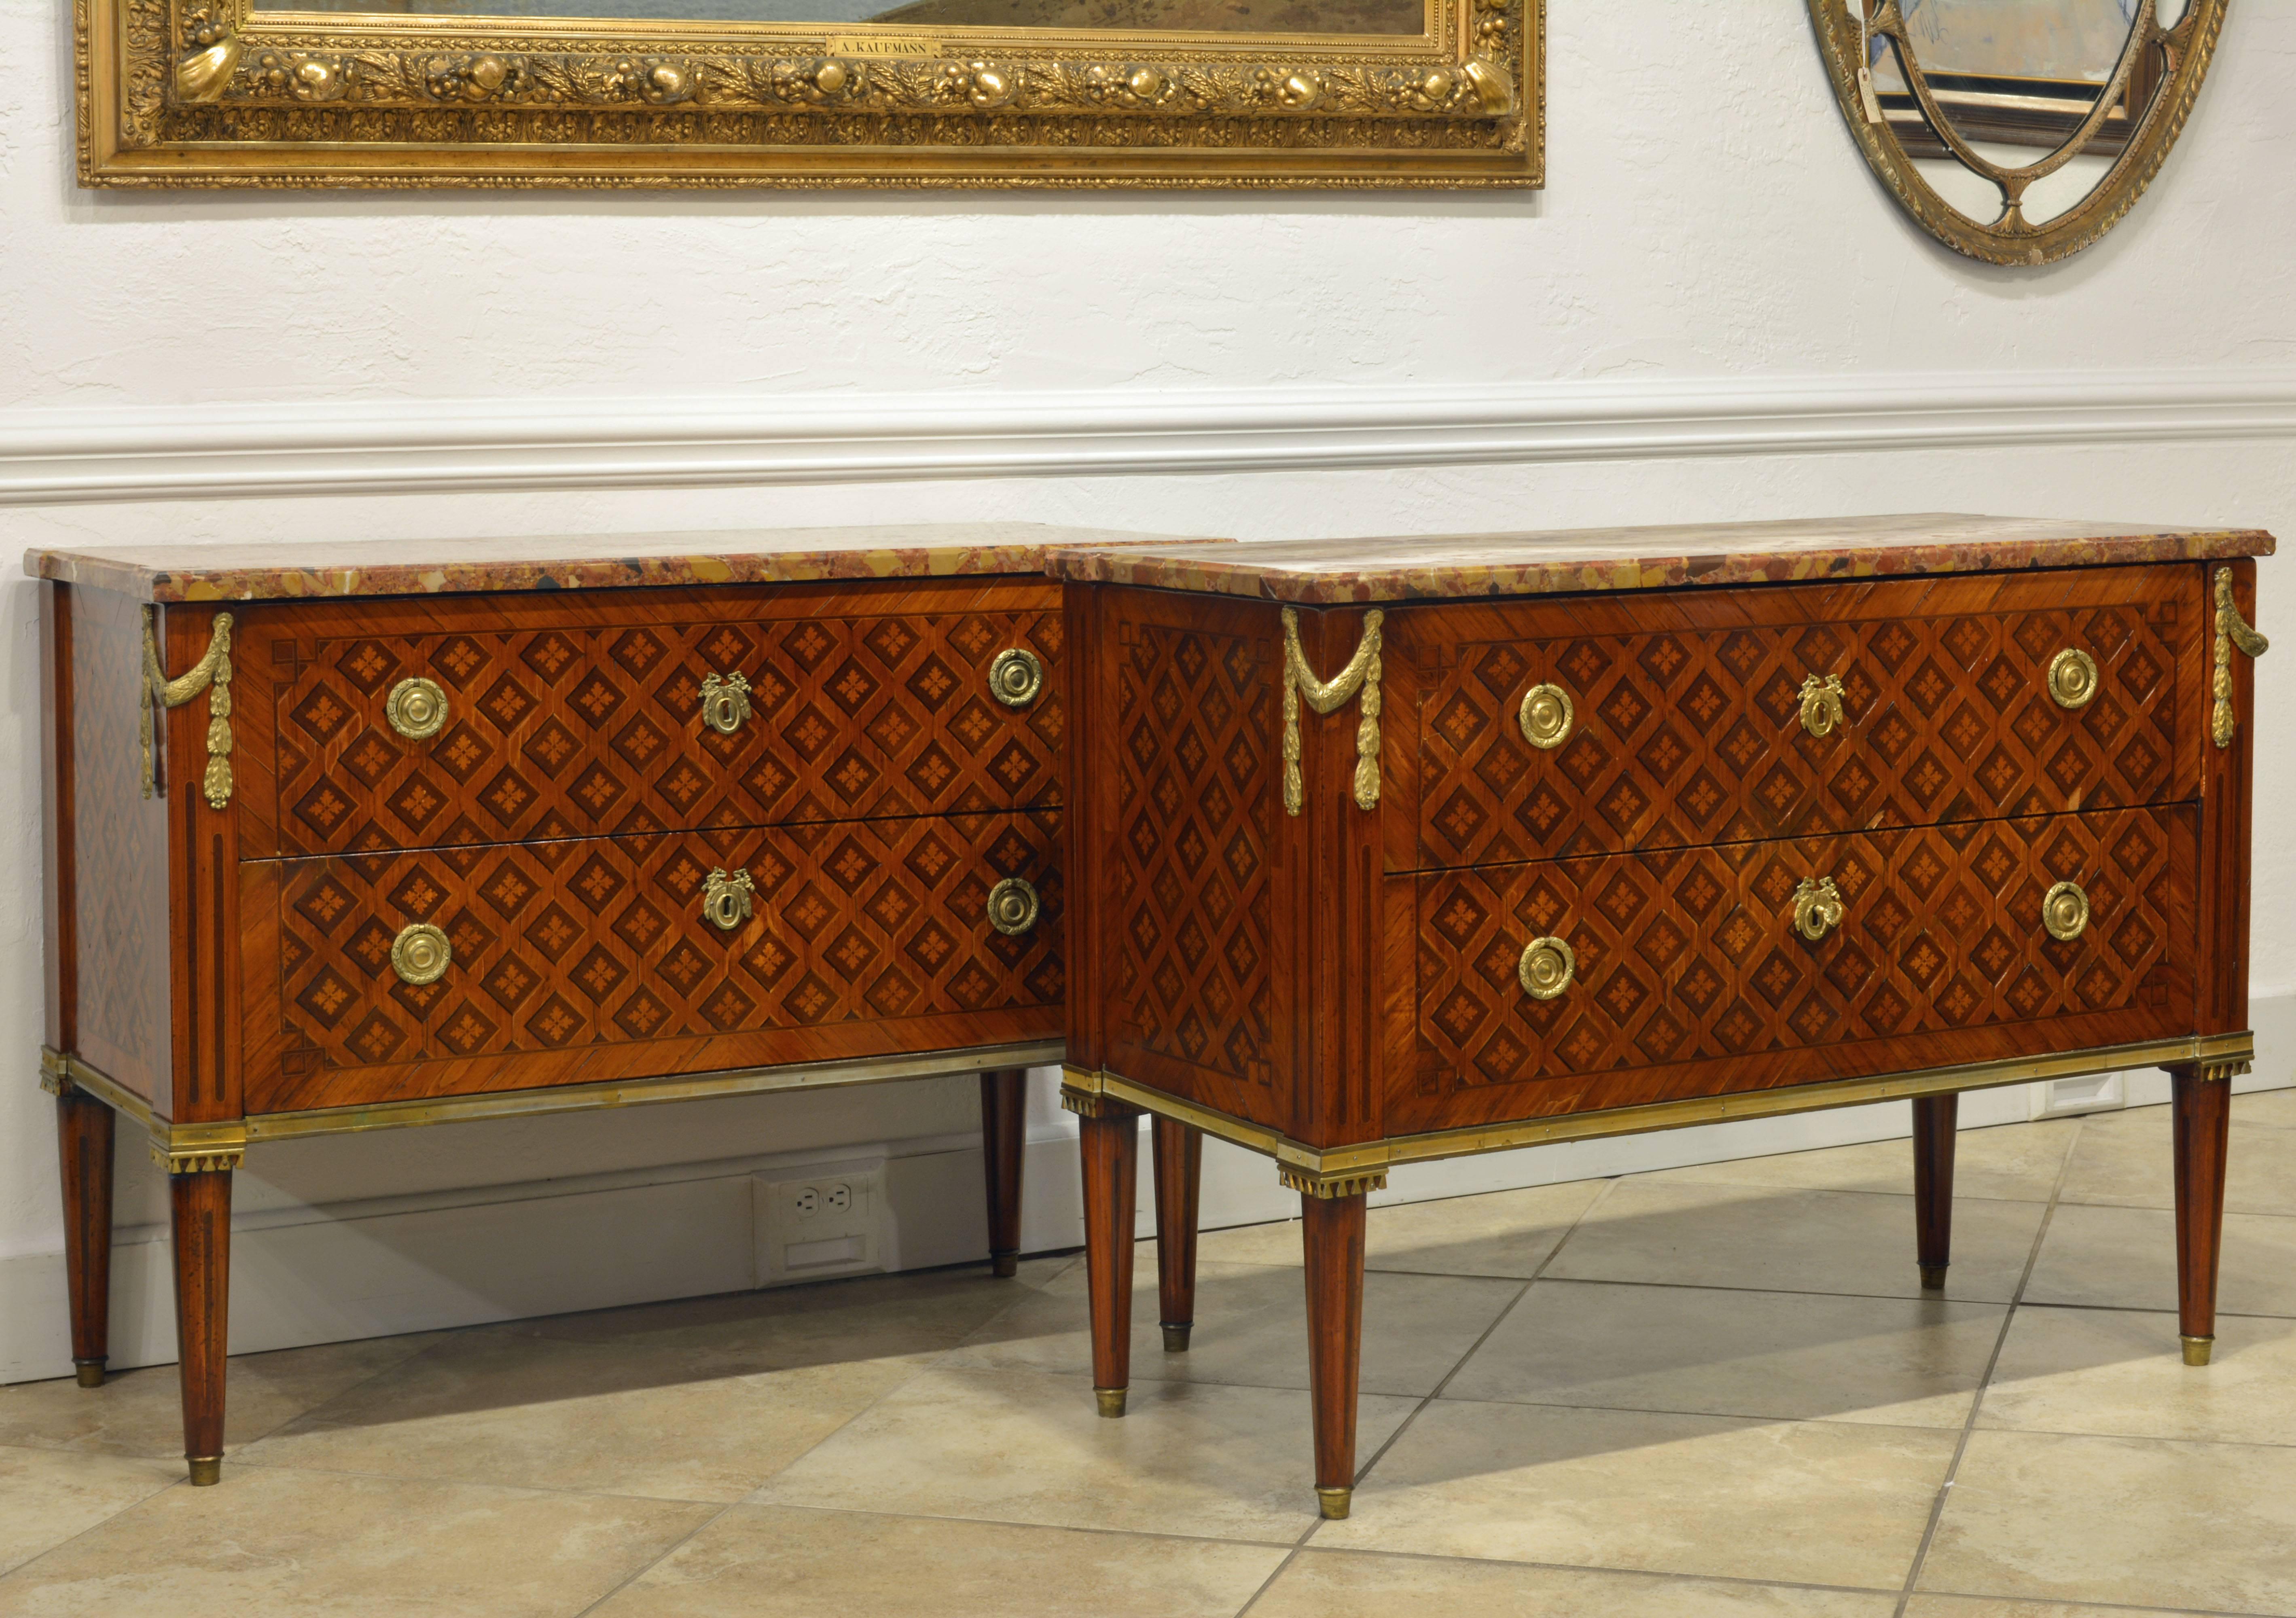 Gilt Pair of 18th Century Louis XVI Ormolu-Mounted Marquetry and Marble Top Commodes